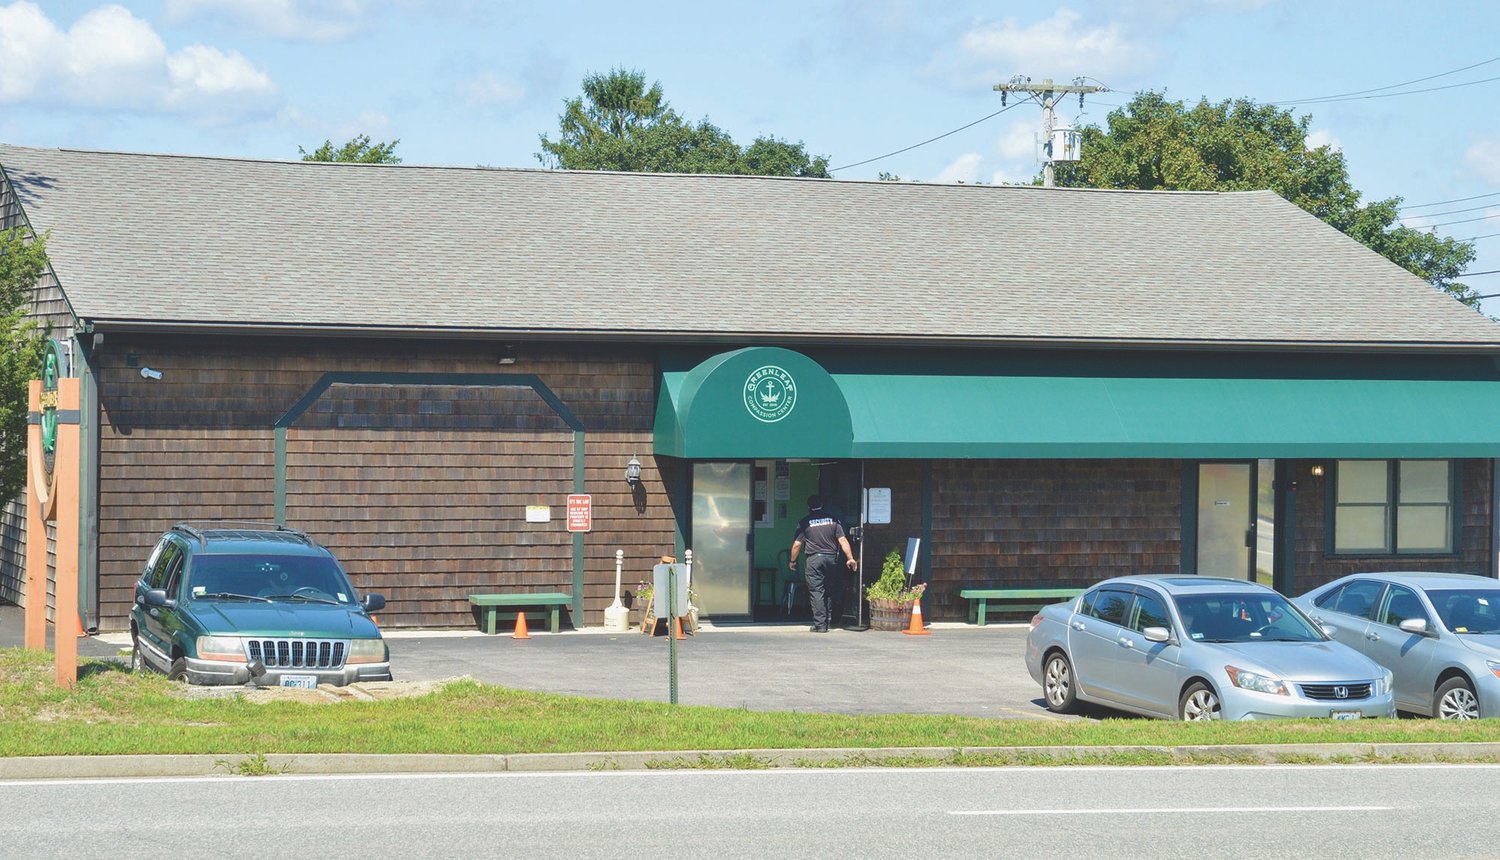 The Greenleaf Compassionate Care Center in Portsmouth is one of the five operators now licensed for recreational use sales as of December 1.